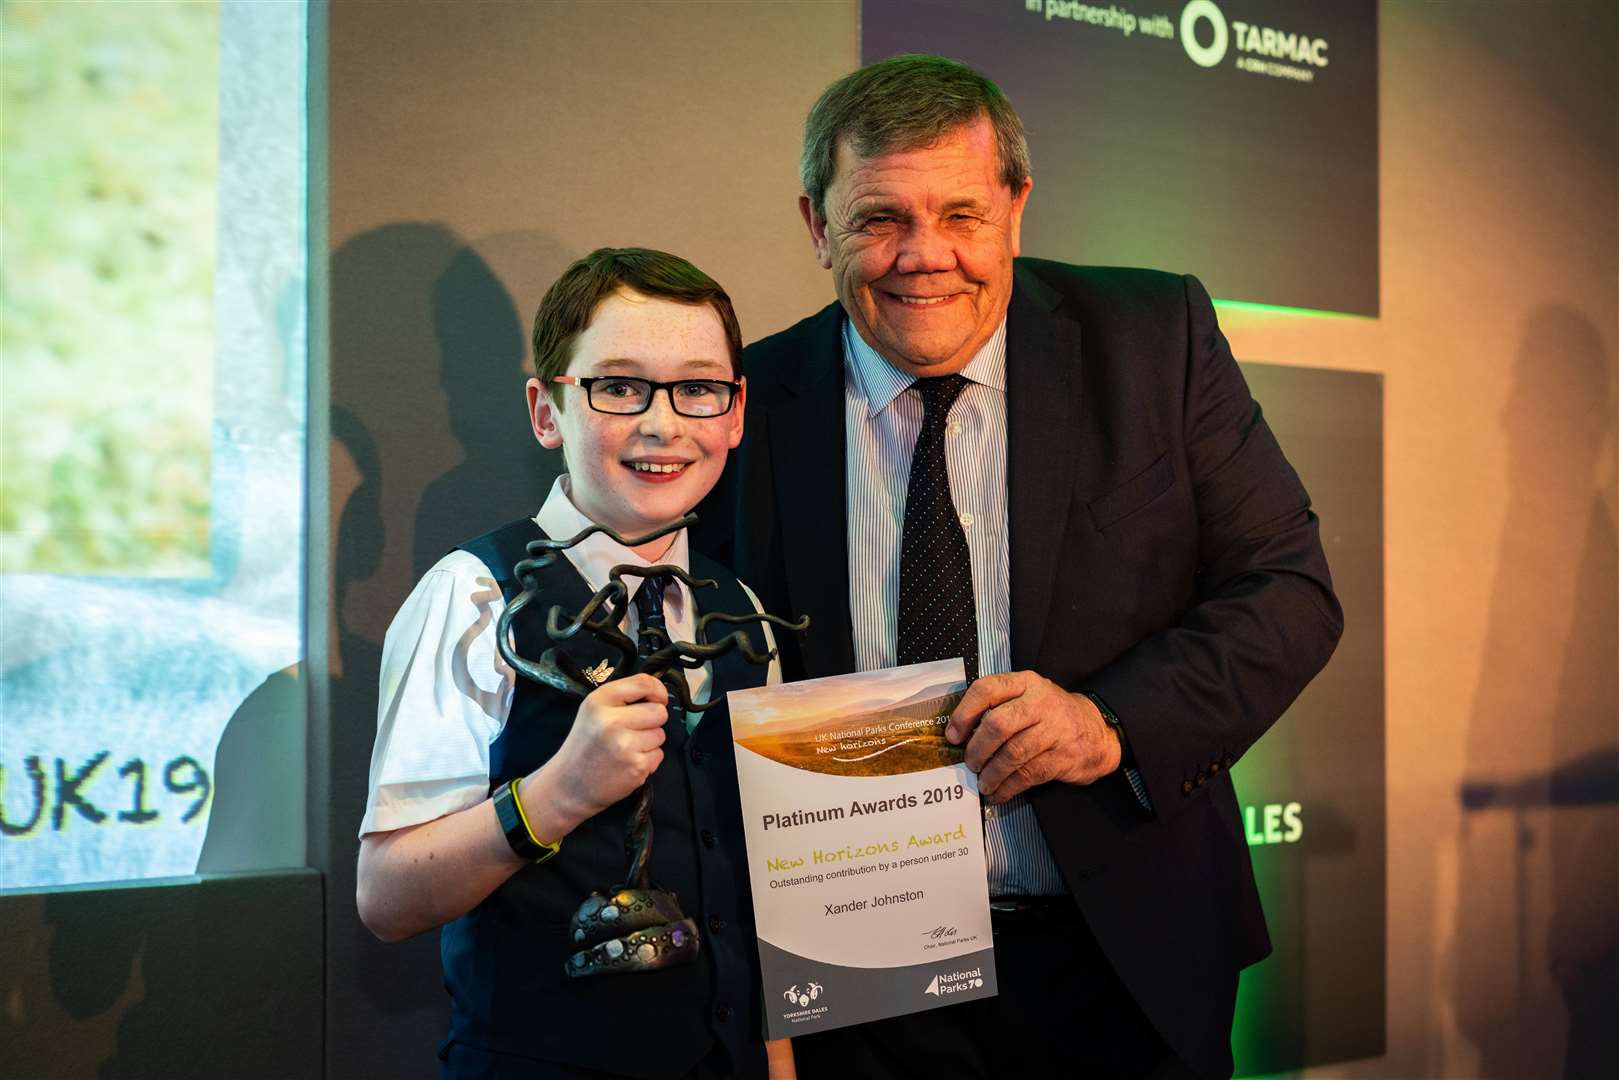 Xander receiving his award from Carl Lis, Chairman of the Yorkshire Dales National Park Authority. The event was held in Leeds.